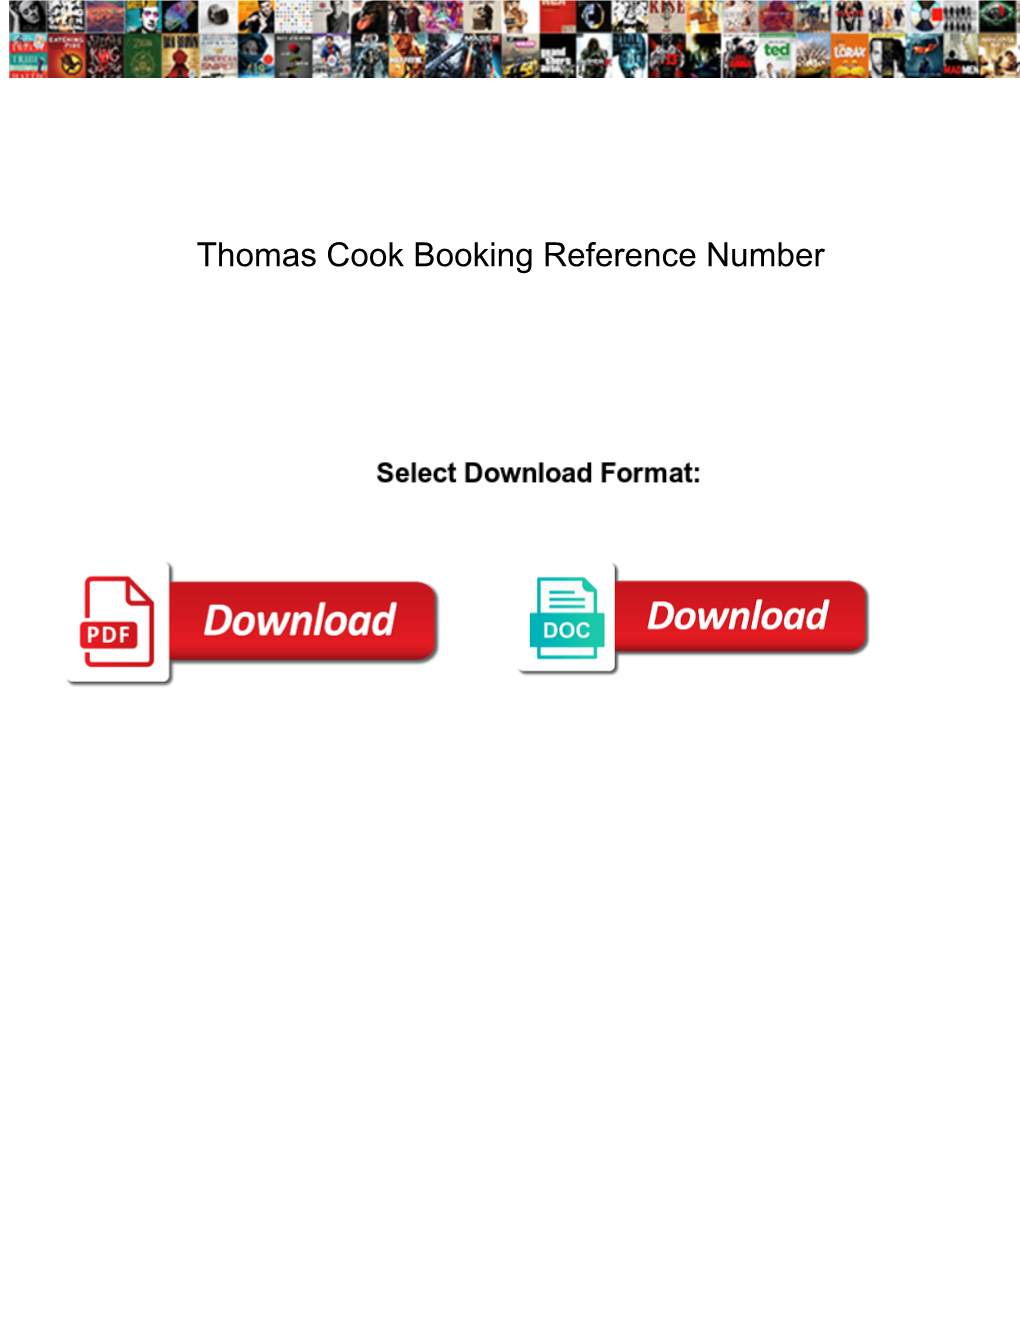 Thomas Cook Booking Reference Number